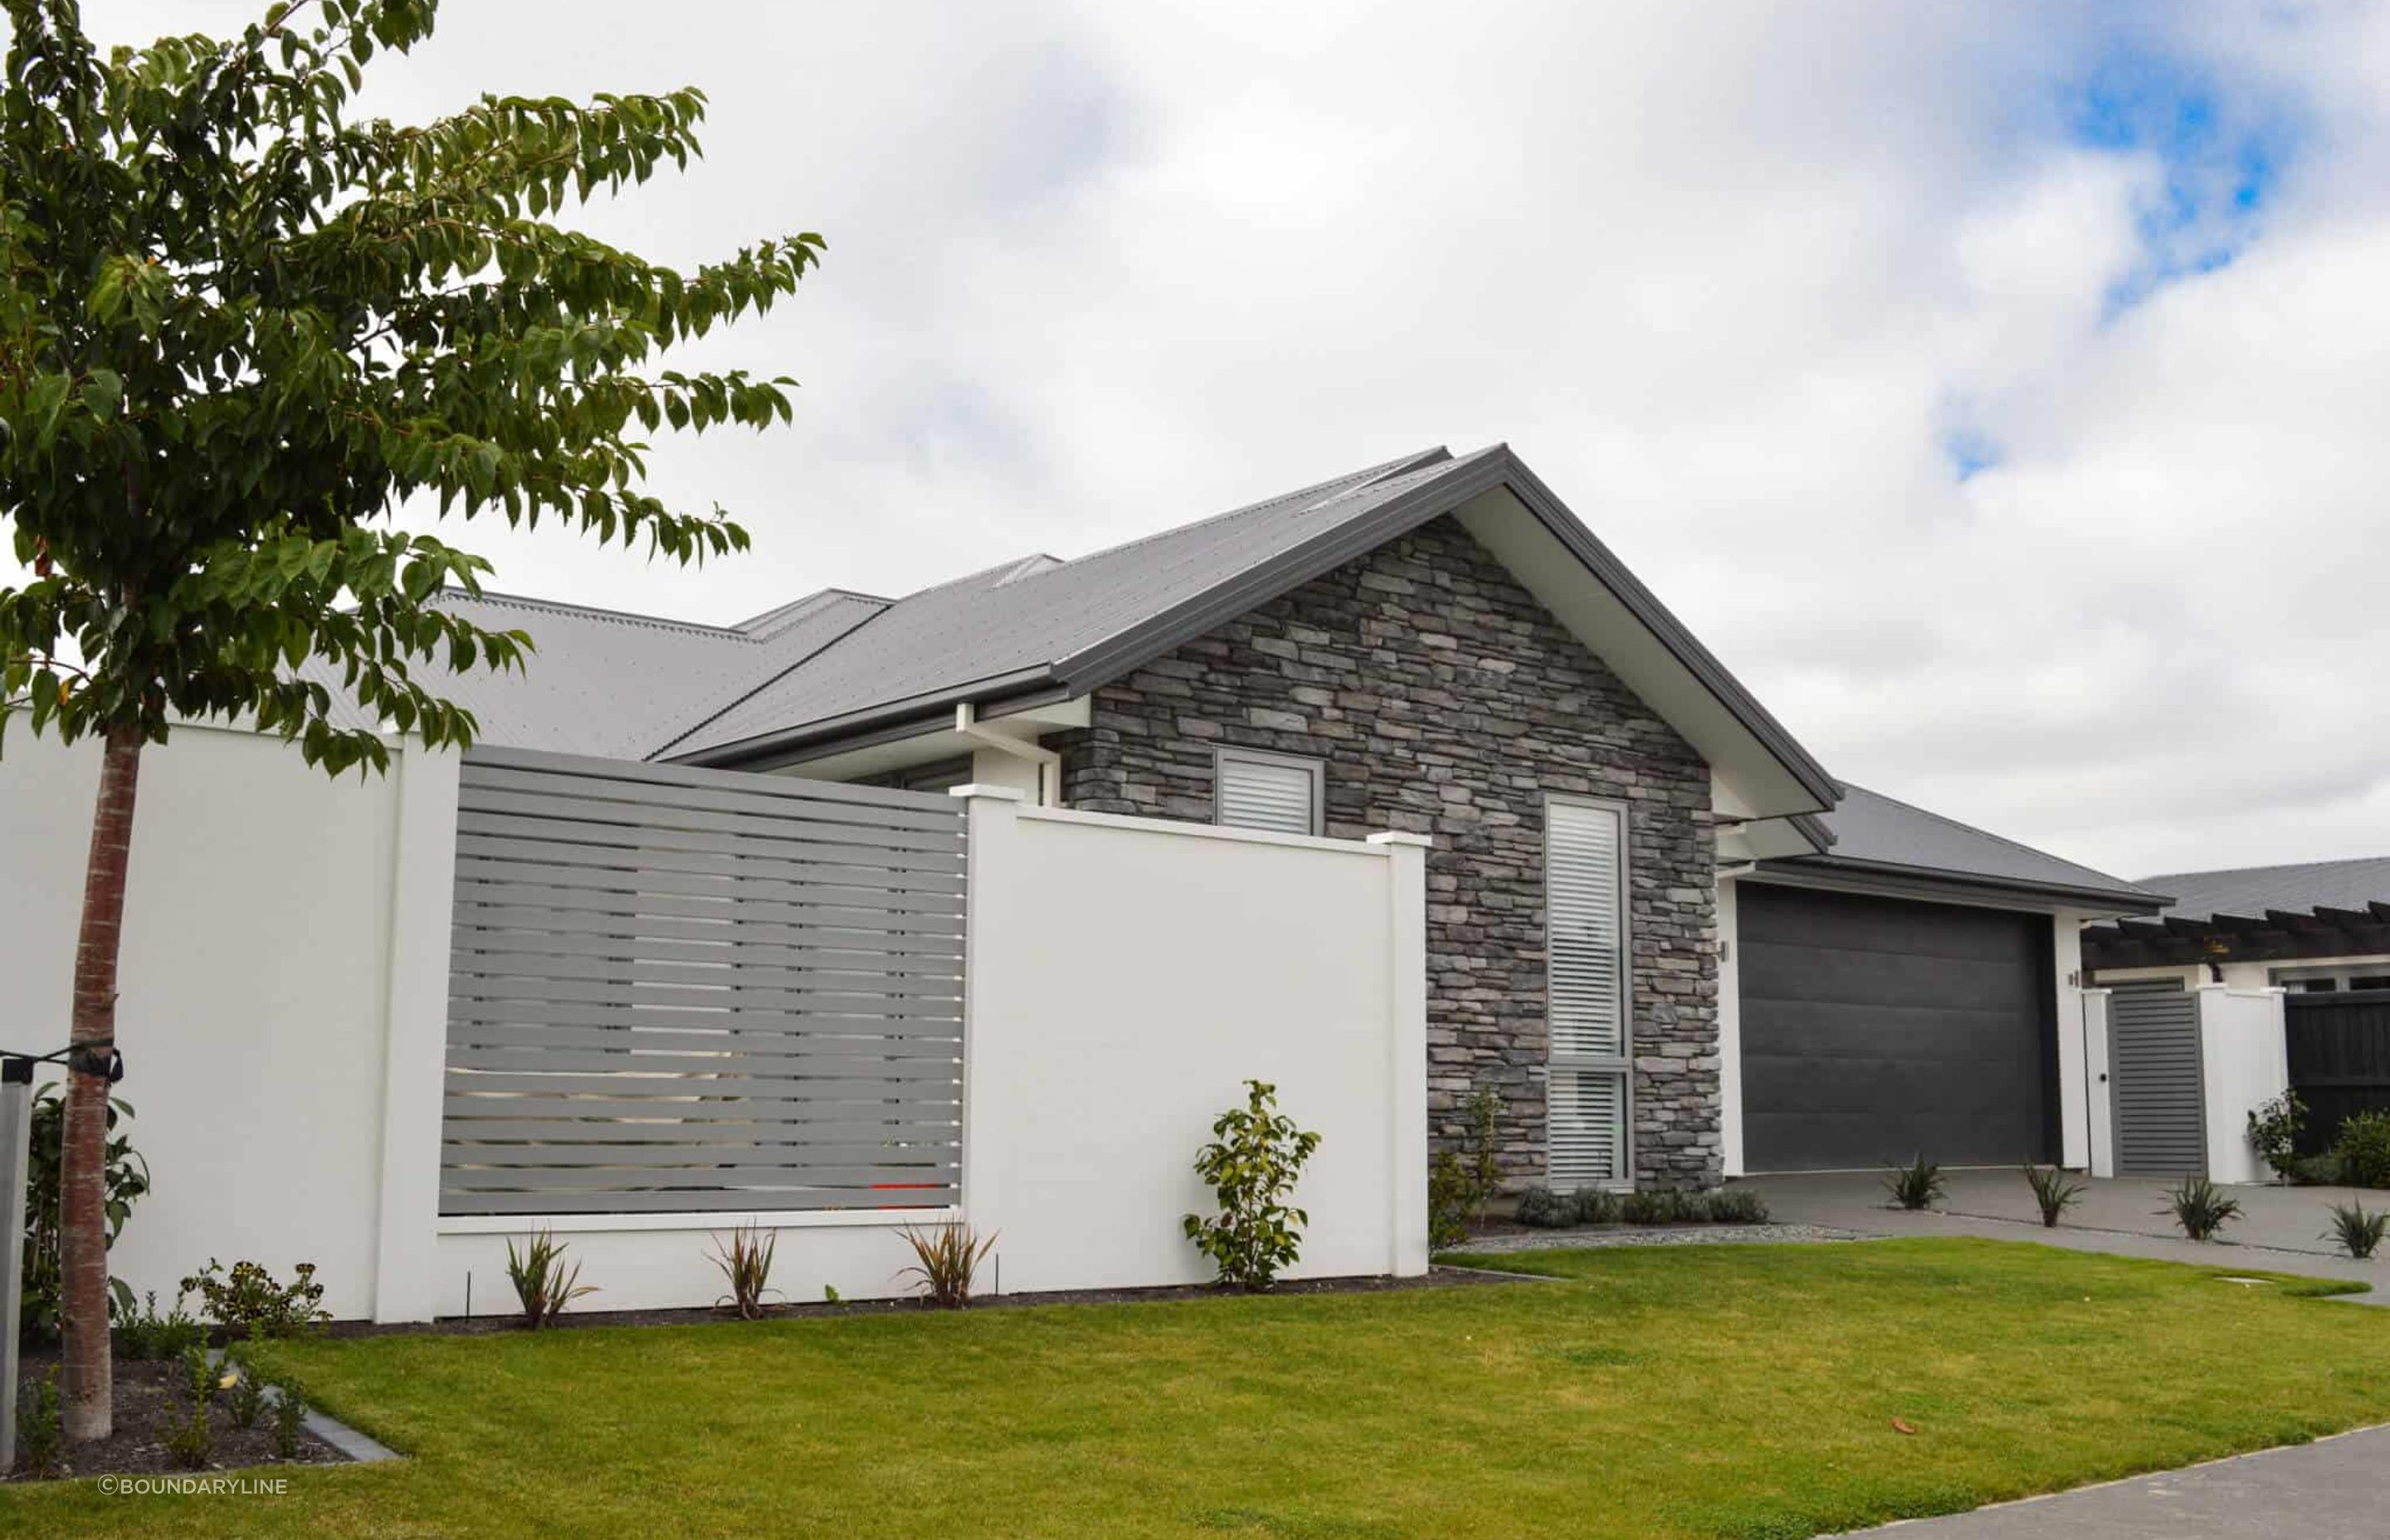 Composite Fencing can be an affordable long-term solution, shown here with Elite Wall by Boundaryline.